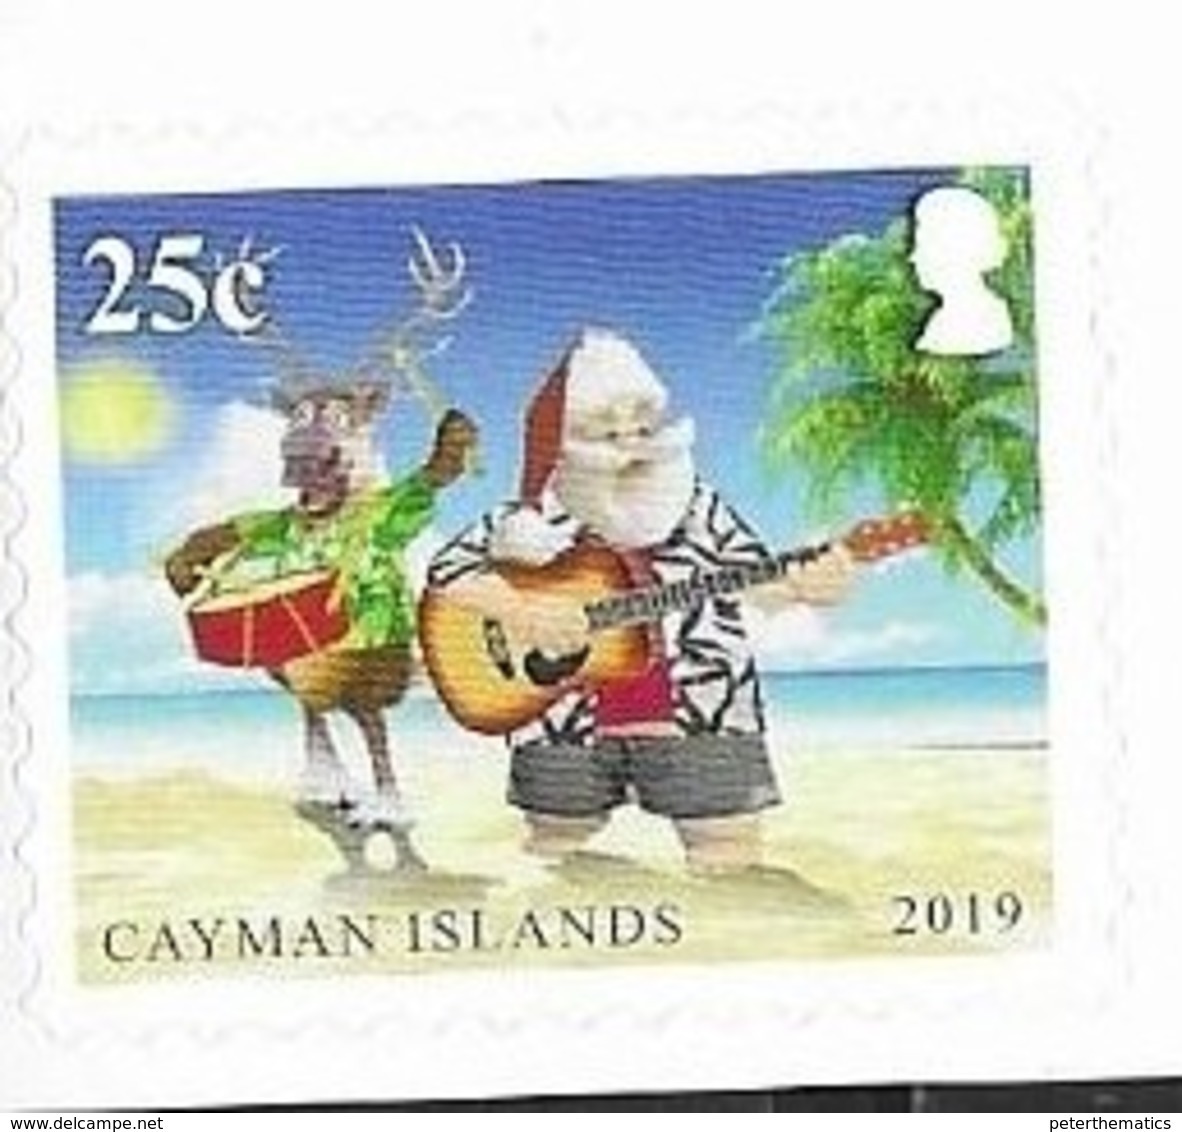 CAYMAN ISLANDS, 2019, MNH, CHRISTMAS, GUITARS, REINDEERS,  1 S/A VALUE Ex. BOOKLET - Christmas